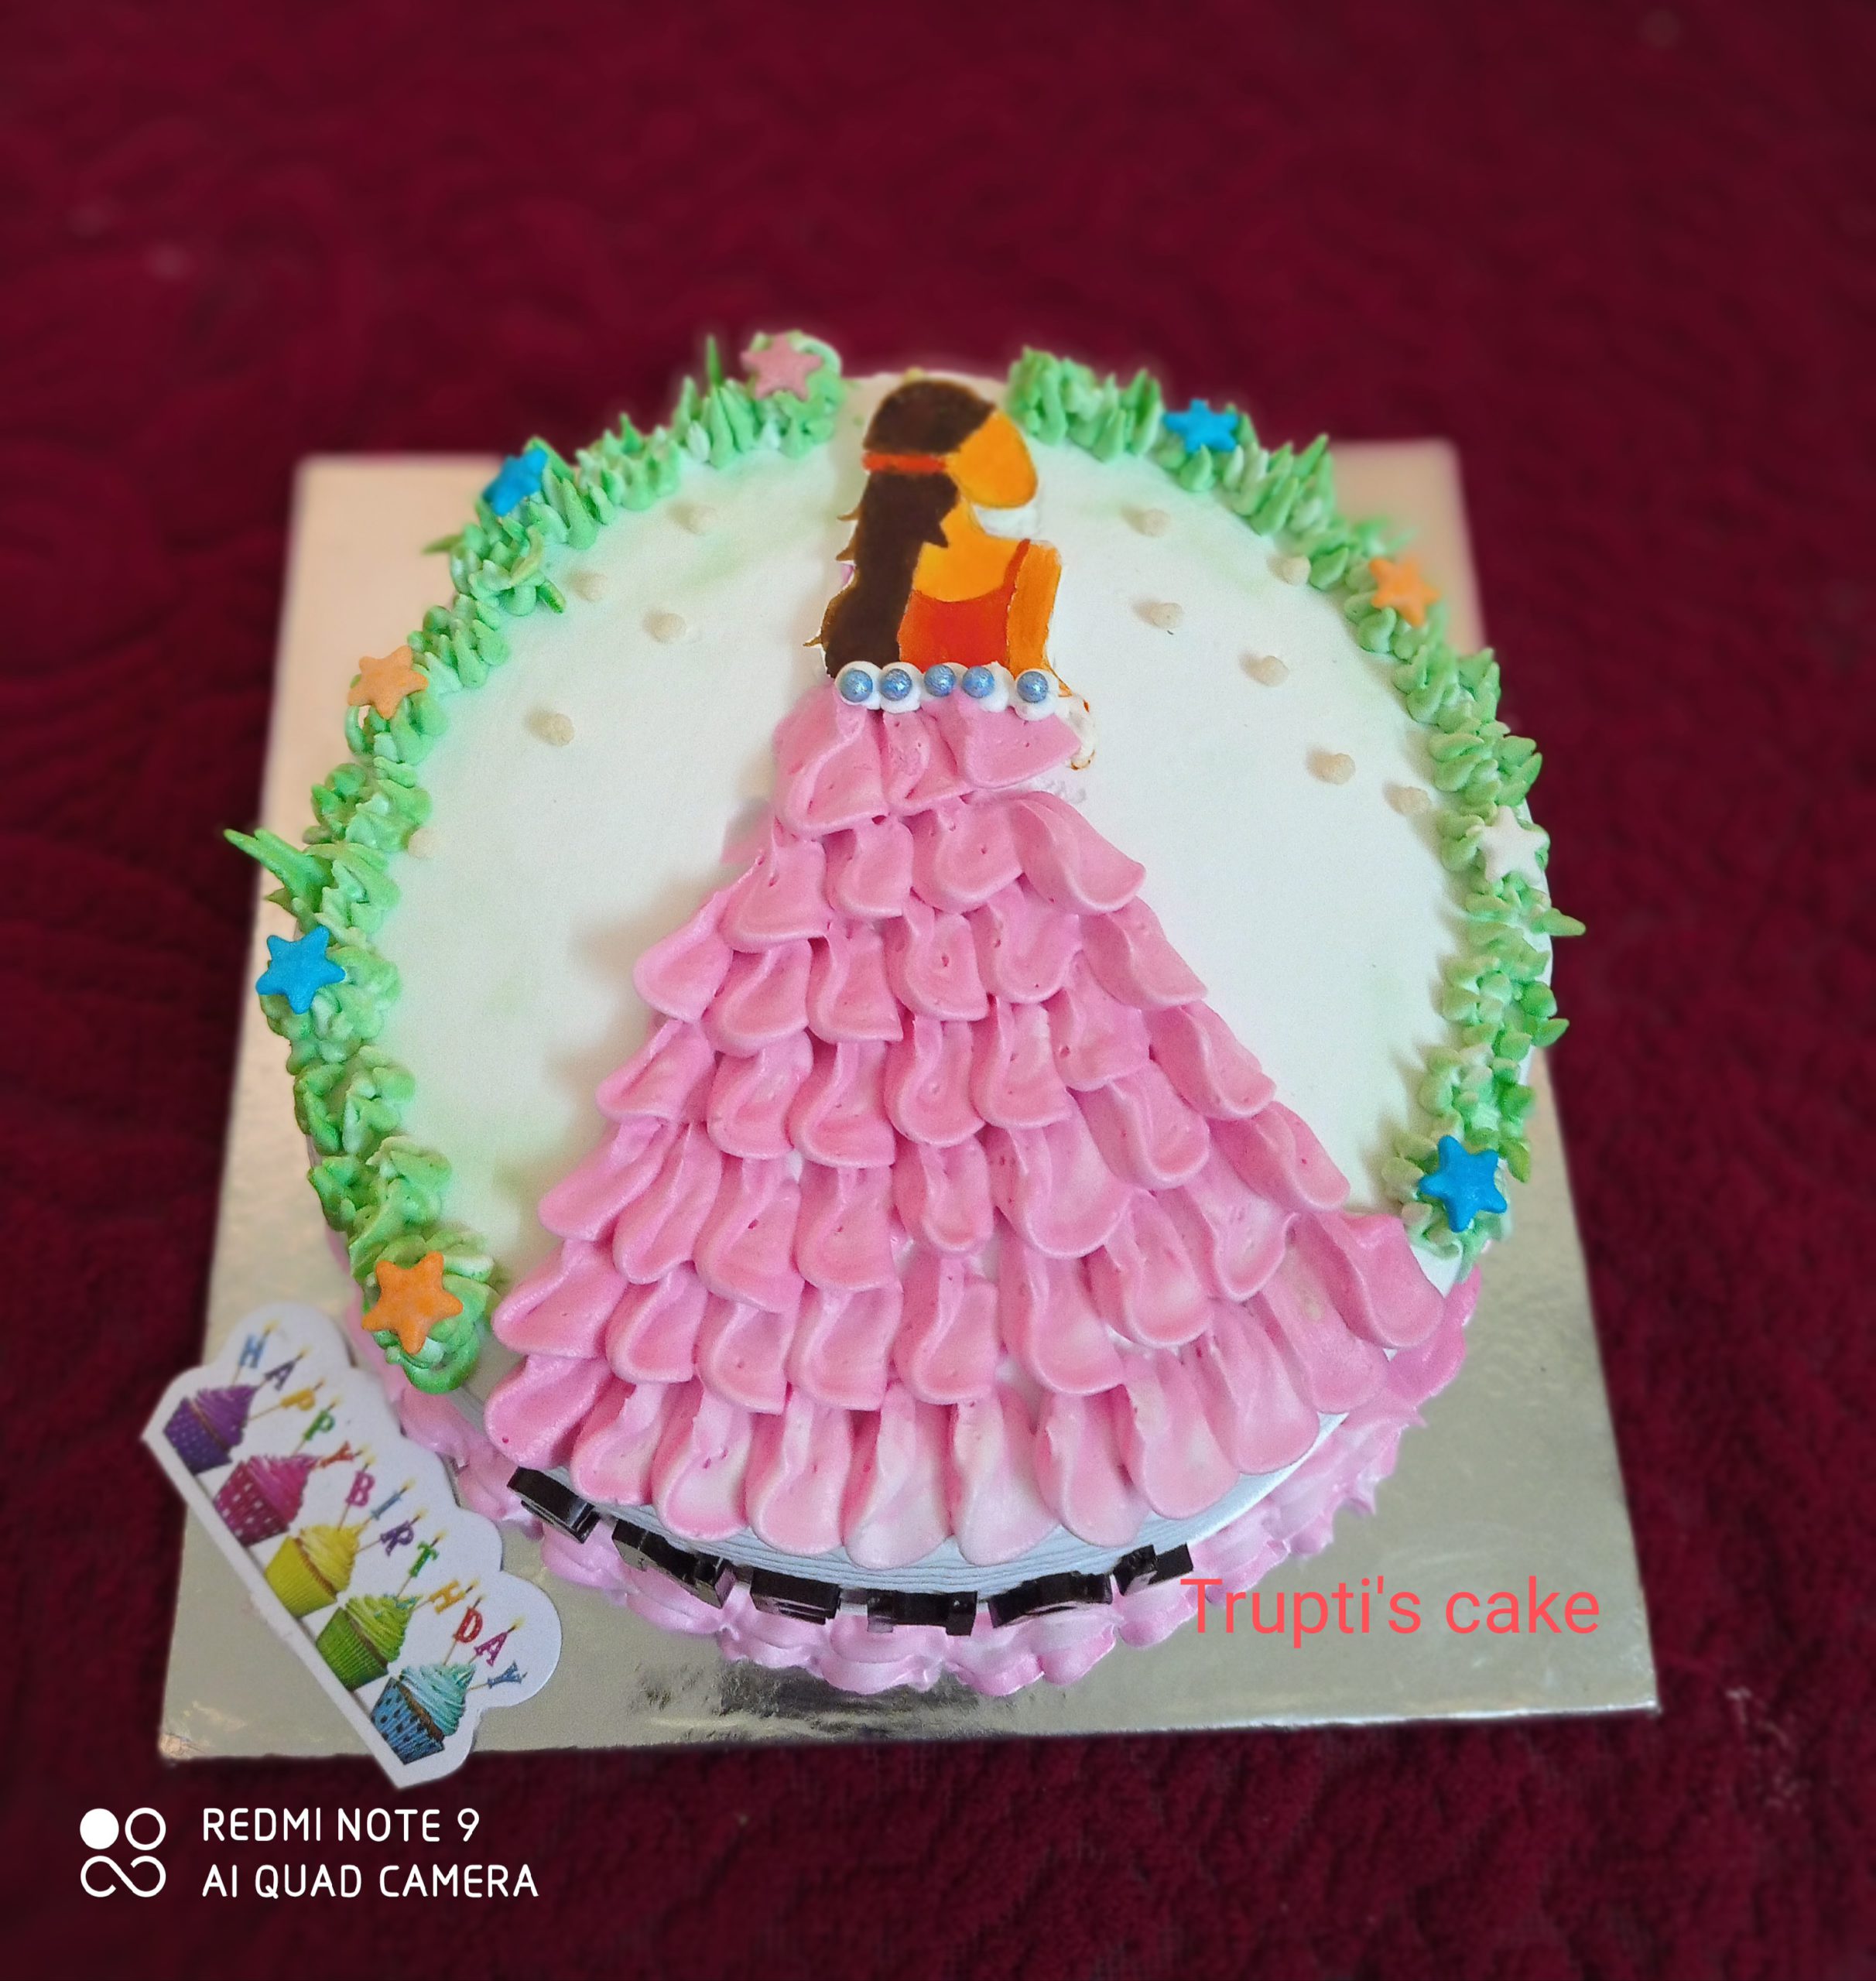 Pineapple Flavour Cake Designs, Images, Price Near Me